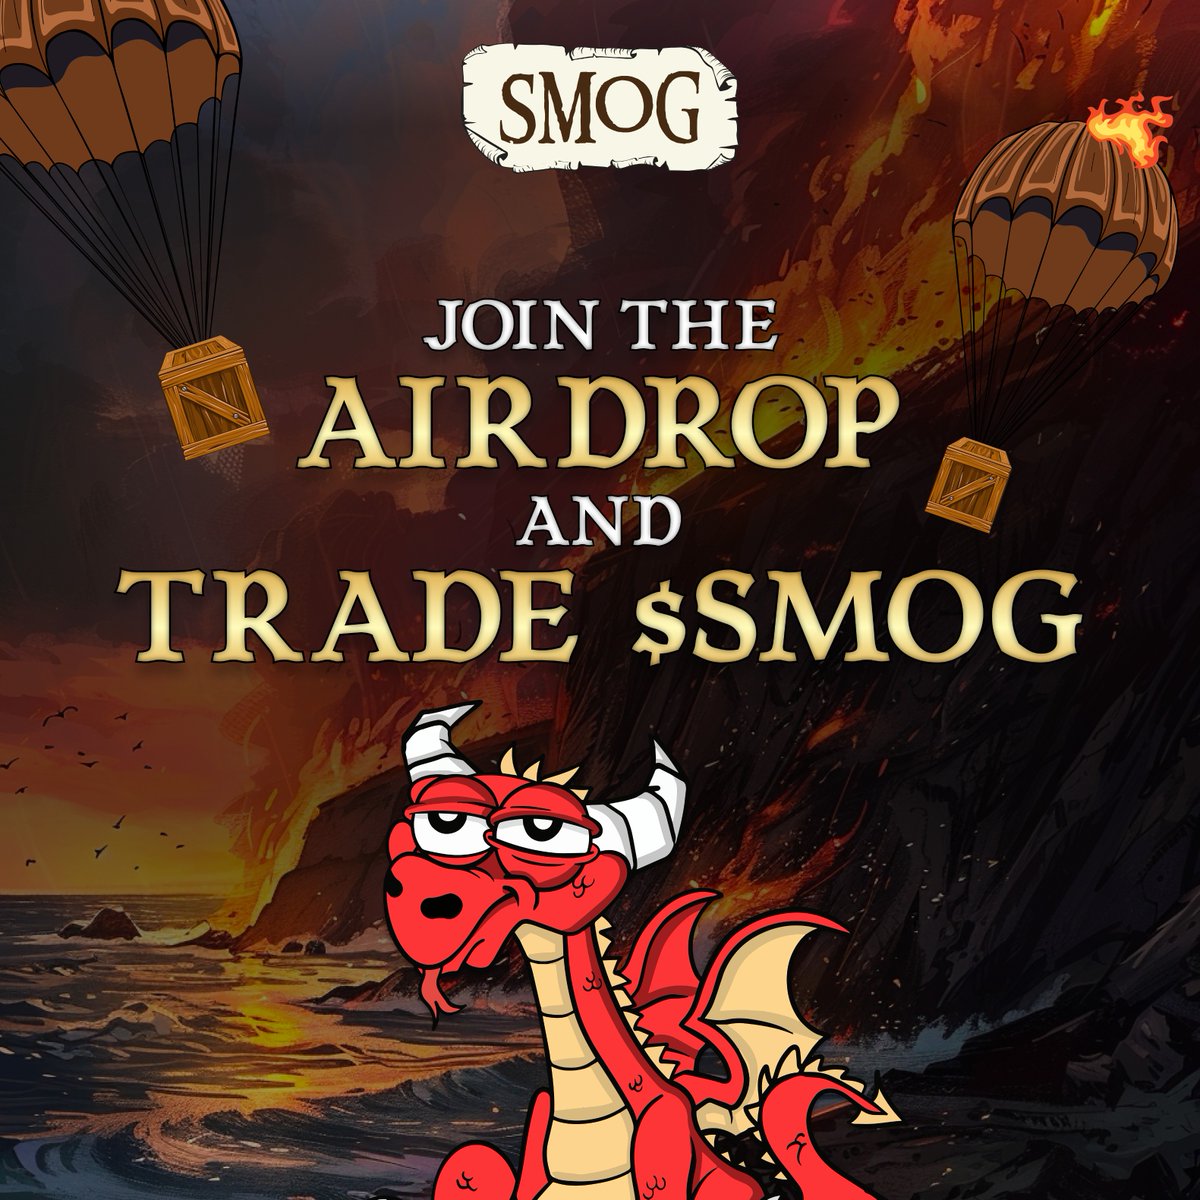 Are you considering joining the #SMOG #Airdrop? 🪂 Feeling a bit bewildered about where to start? 🤔 We're soaring through Season 2 with great enthusiasm! 🚀 The ultimate way to ignite your #Dragon adventure and amplify your XP is by #Trading $SMOG! ⬇️ bit.ly/BuySmog